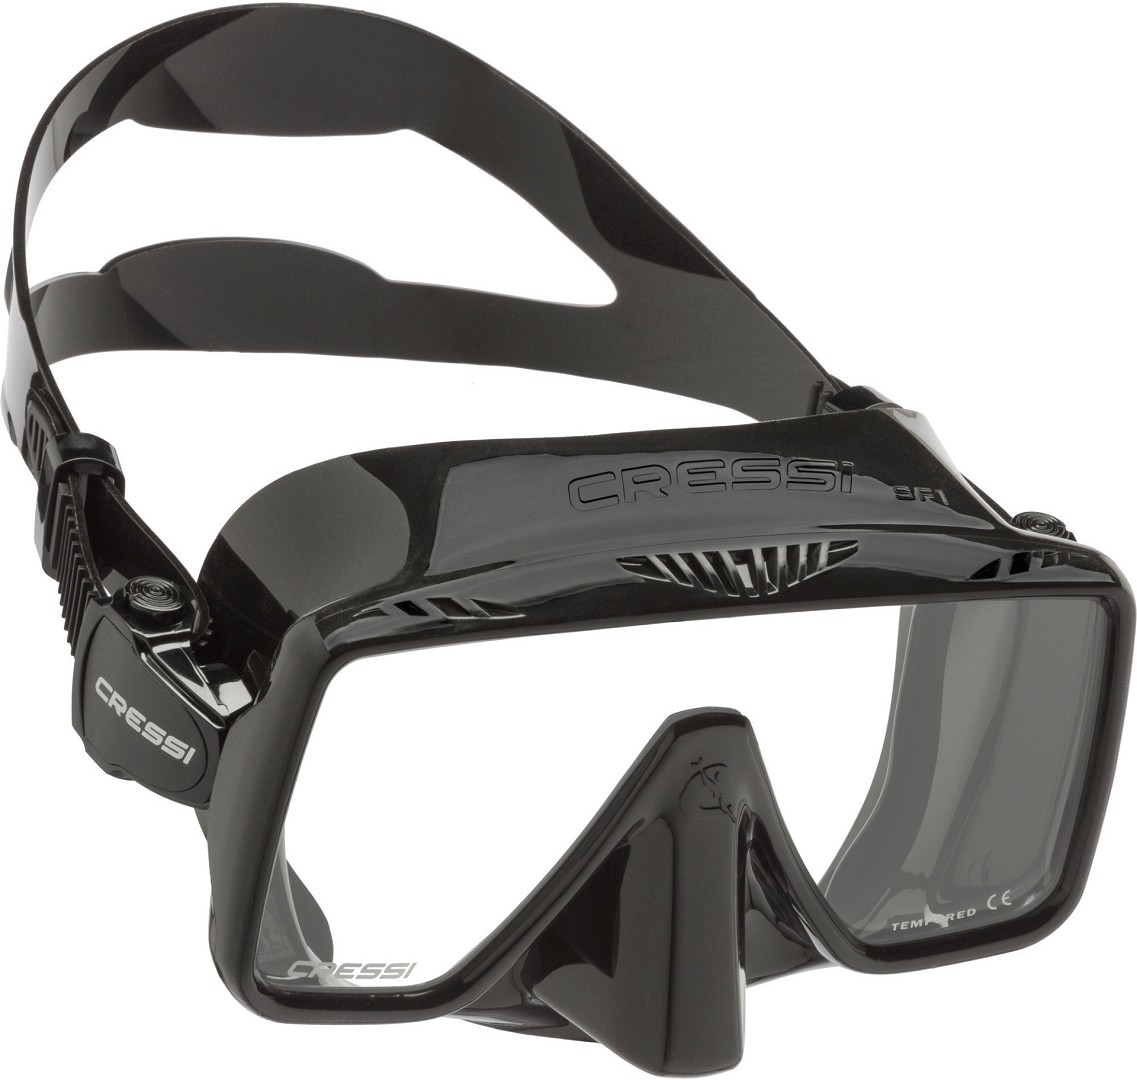 Cressi Cressi Scuba Diving flippers Typhoon Tempered Mask 